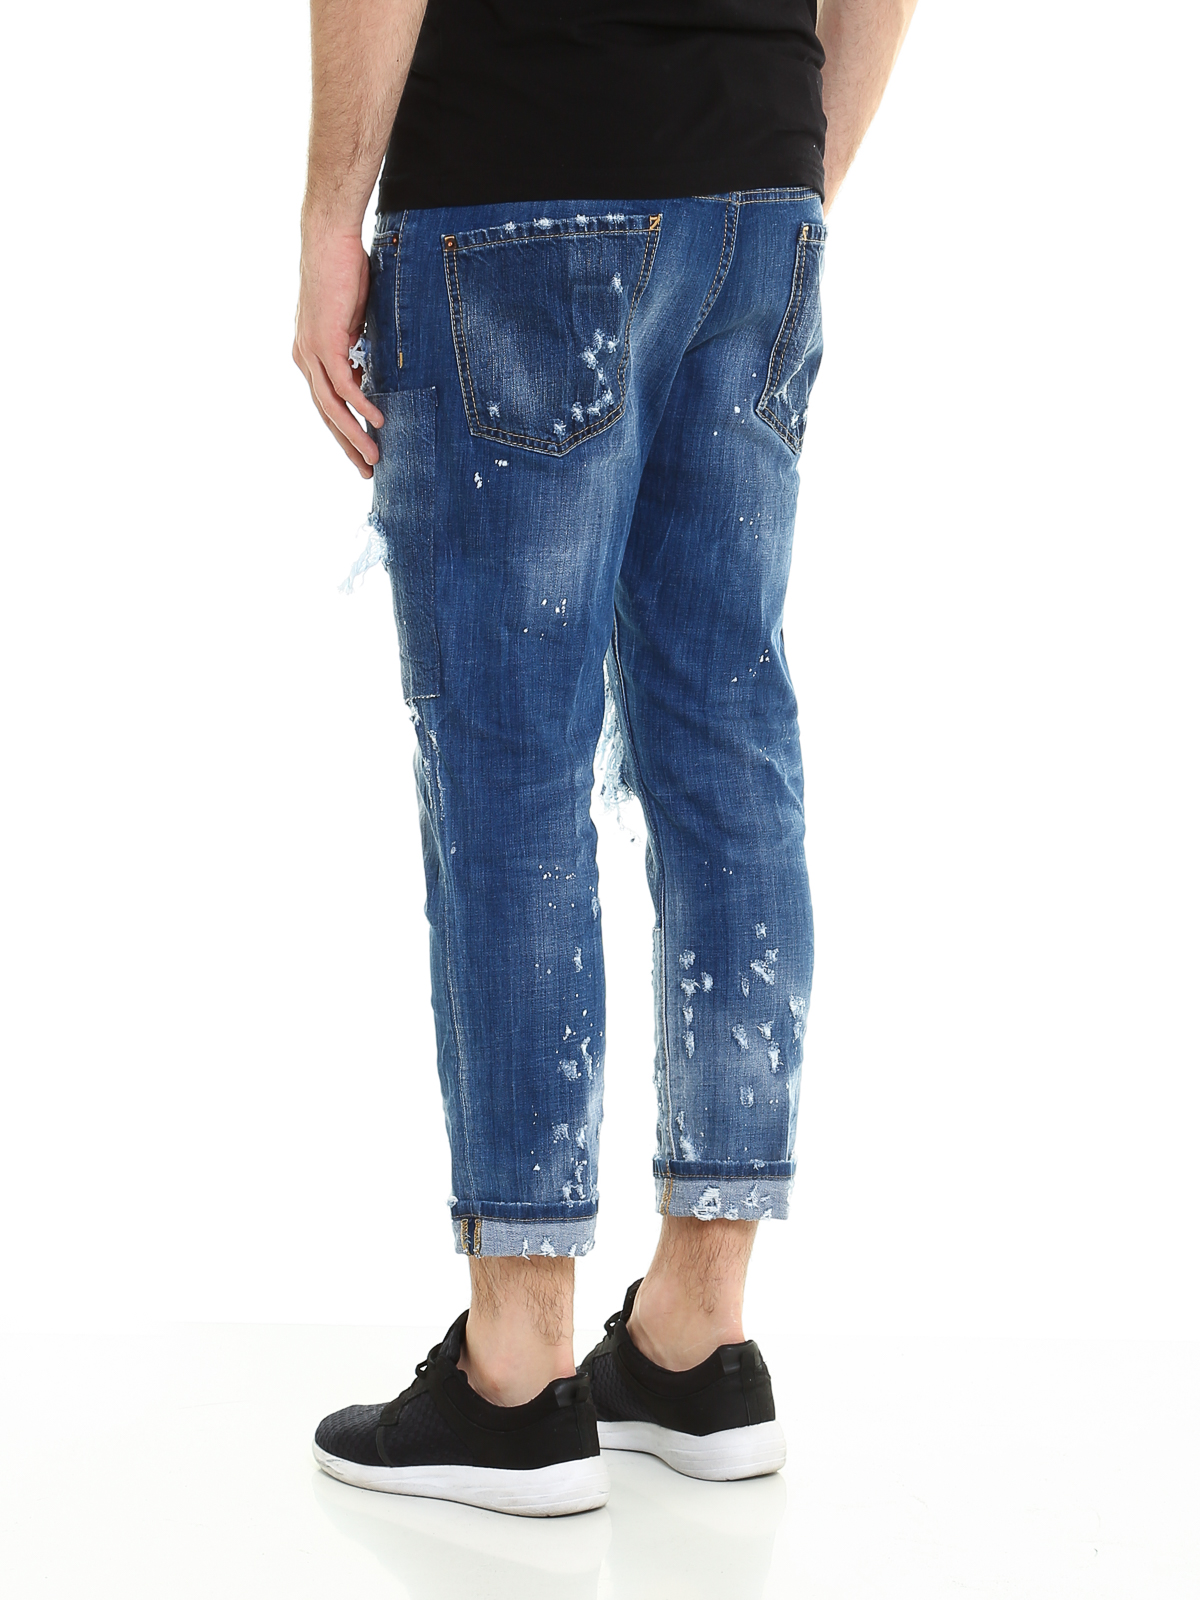 dsquared2 glam head jeans